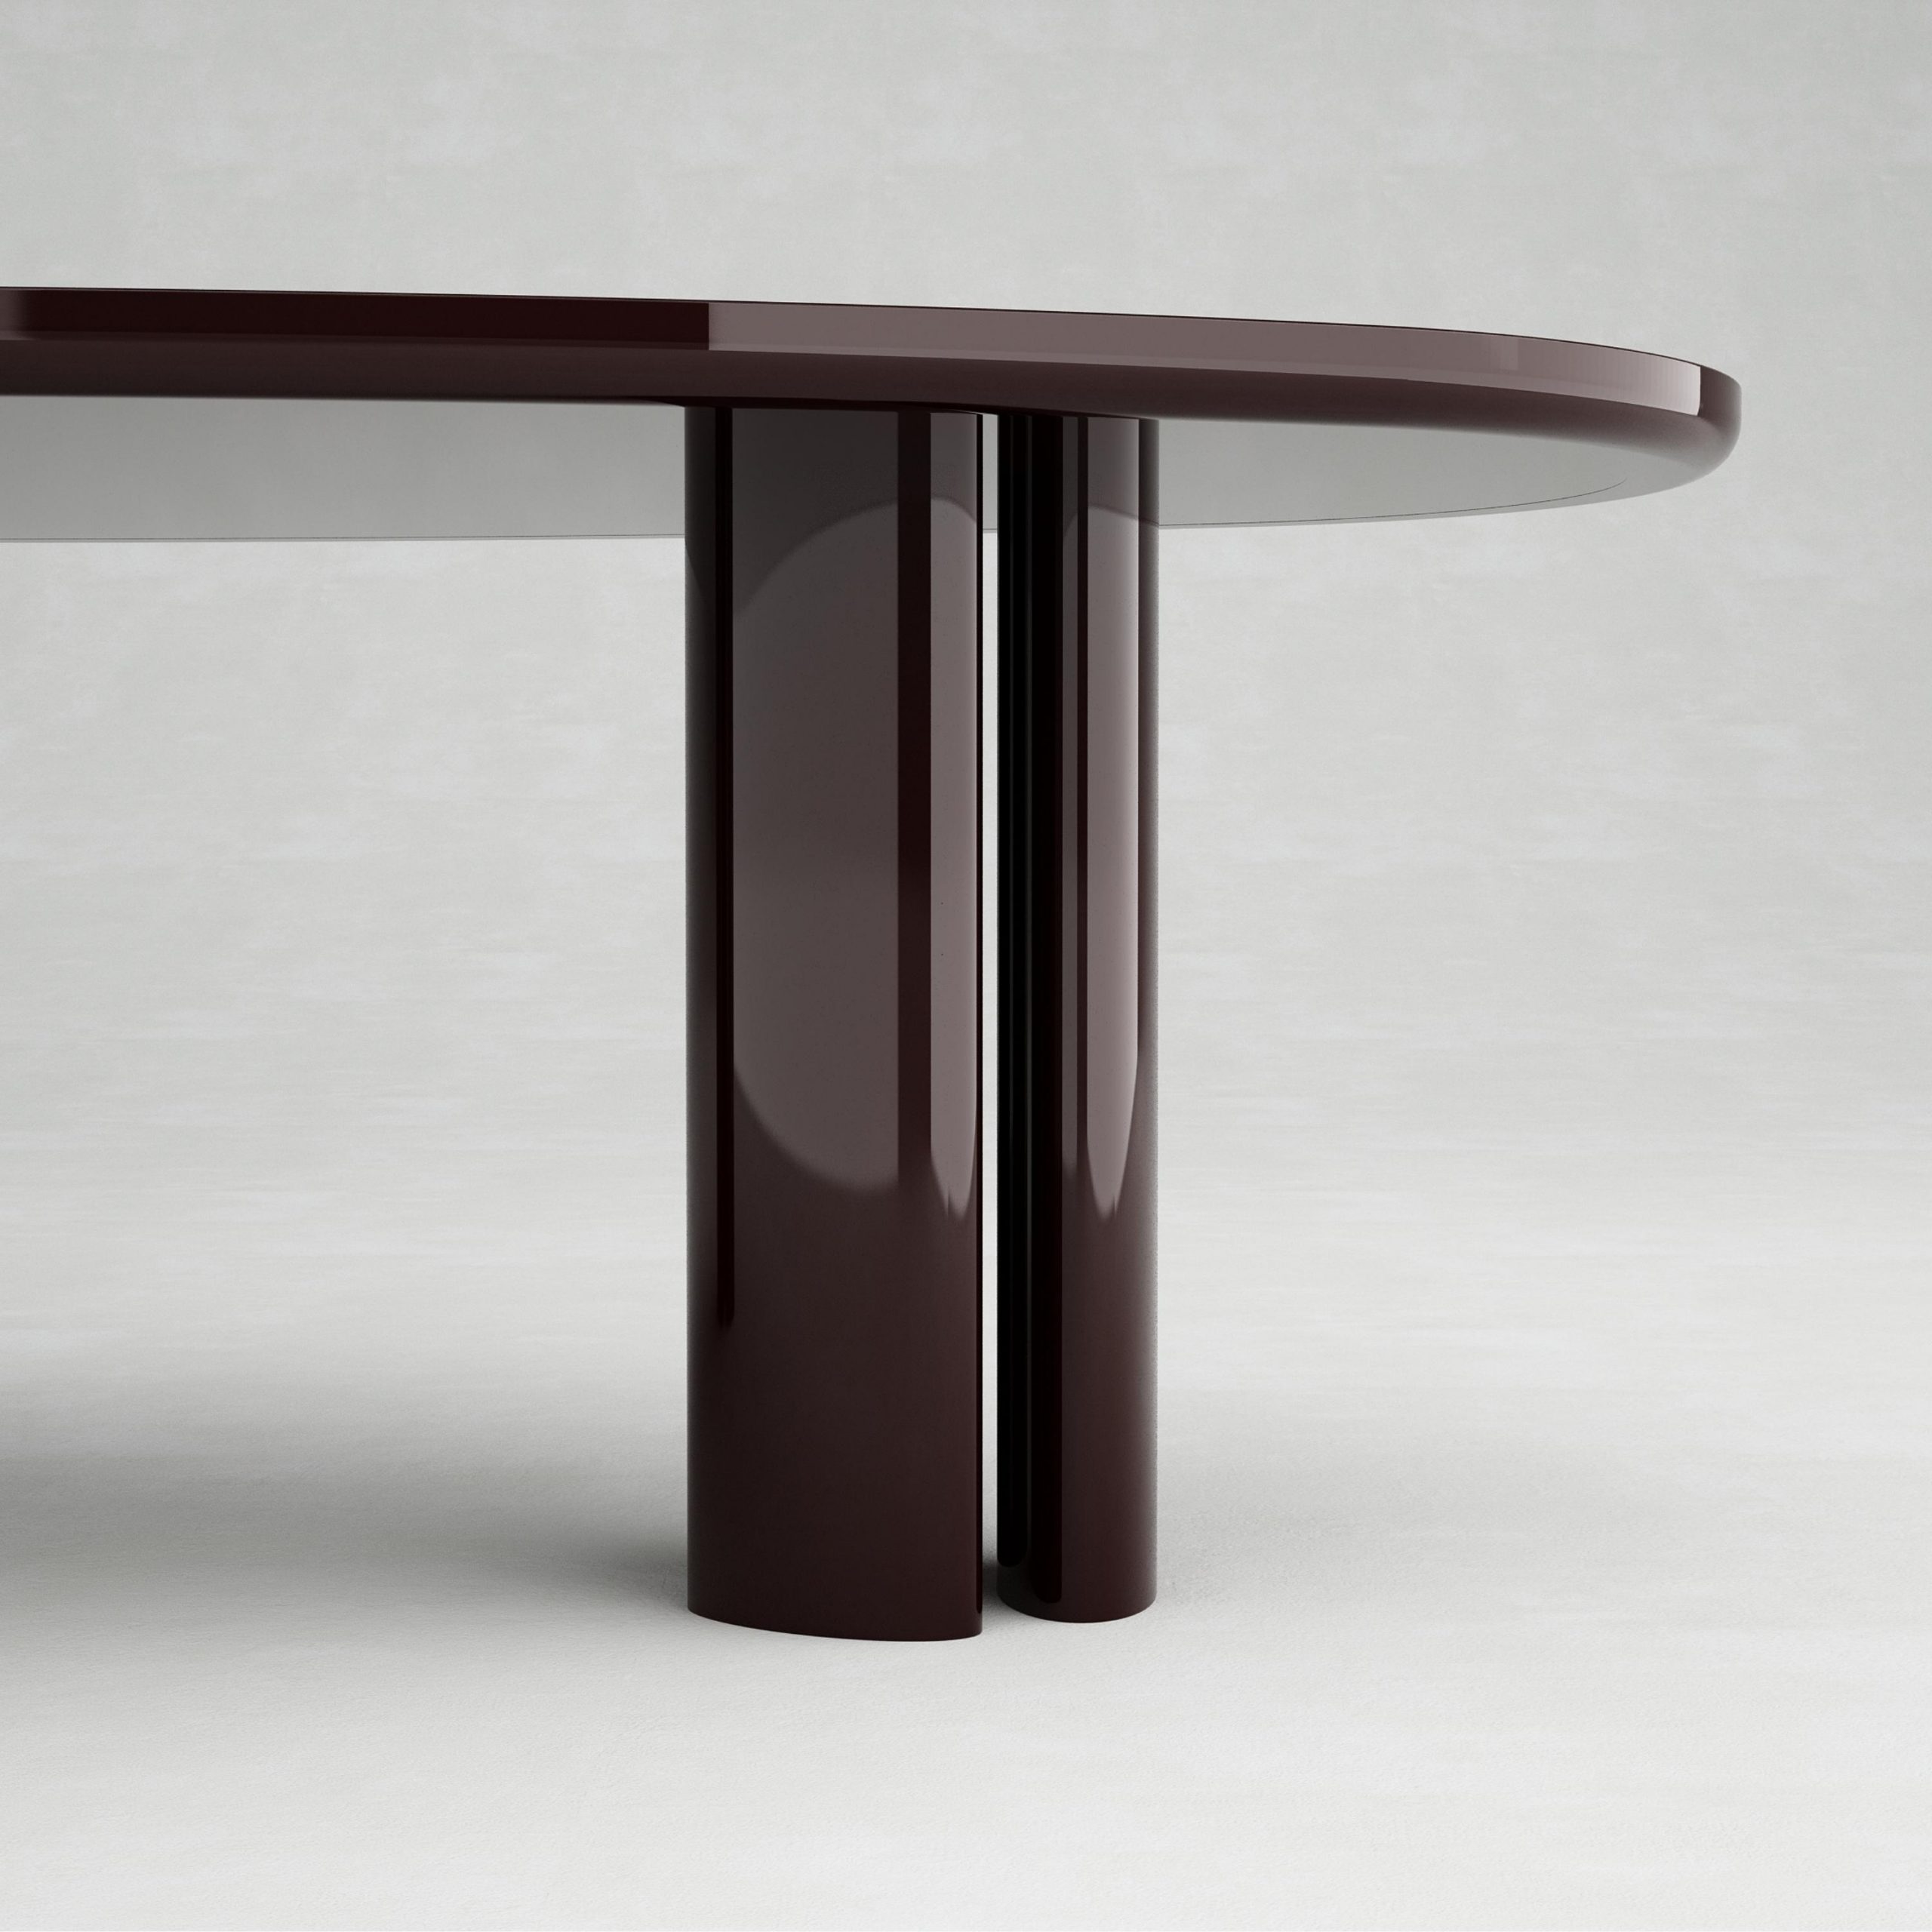 Lacquer Collection Francesco Swan Table Balzano Dining The Invisible Burgundy